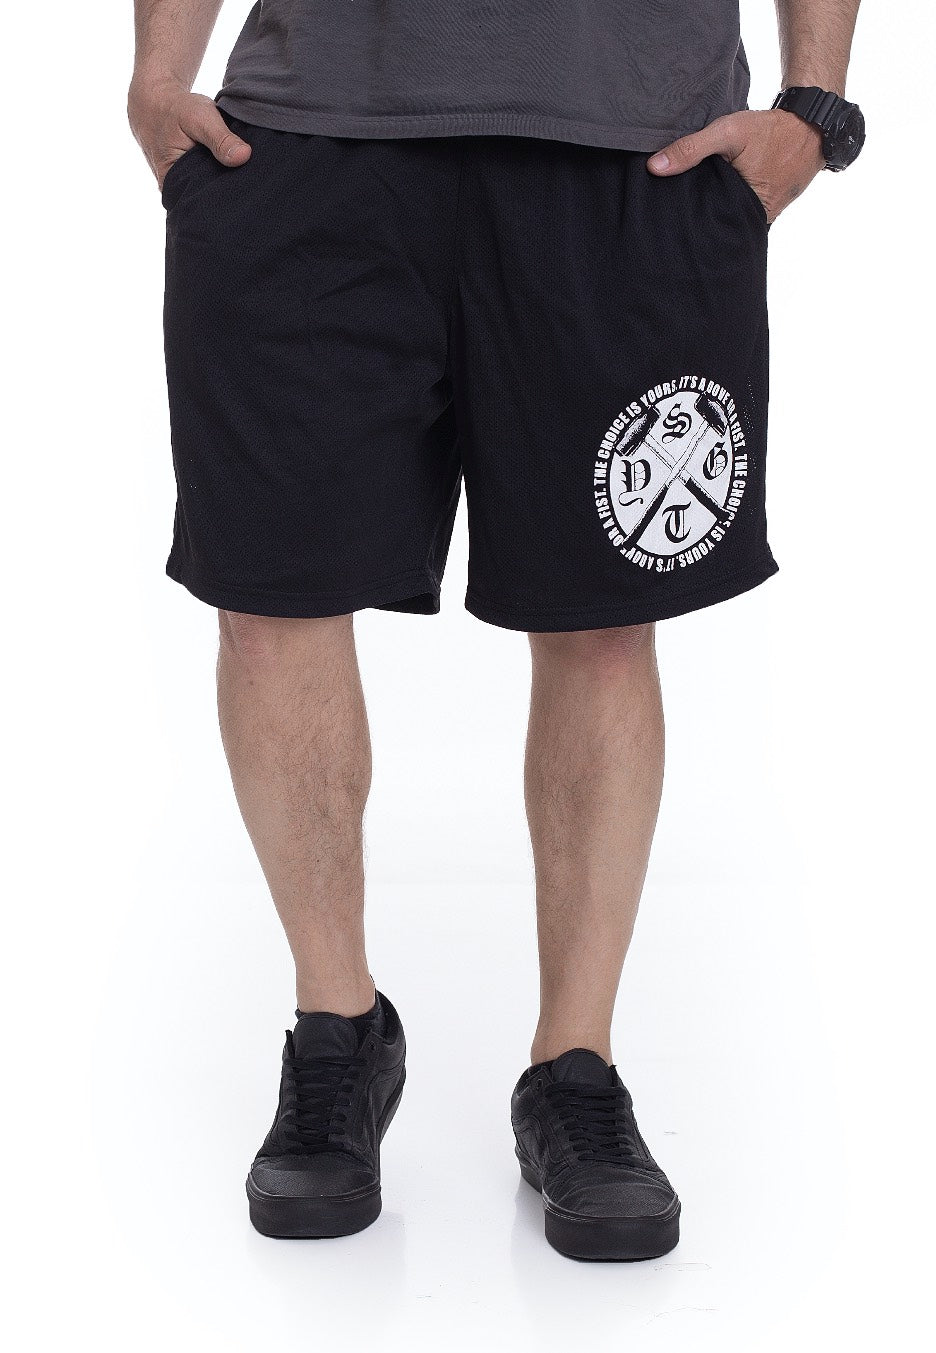 Stick To Your Guns - Dove Or Fist - Shorts | Men-Image